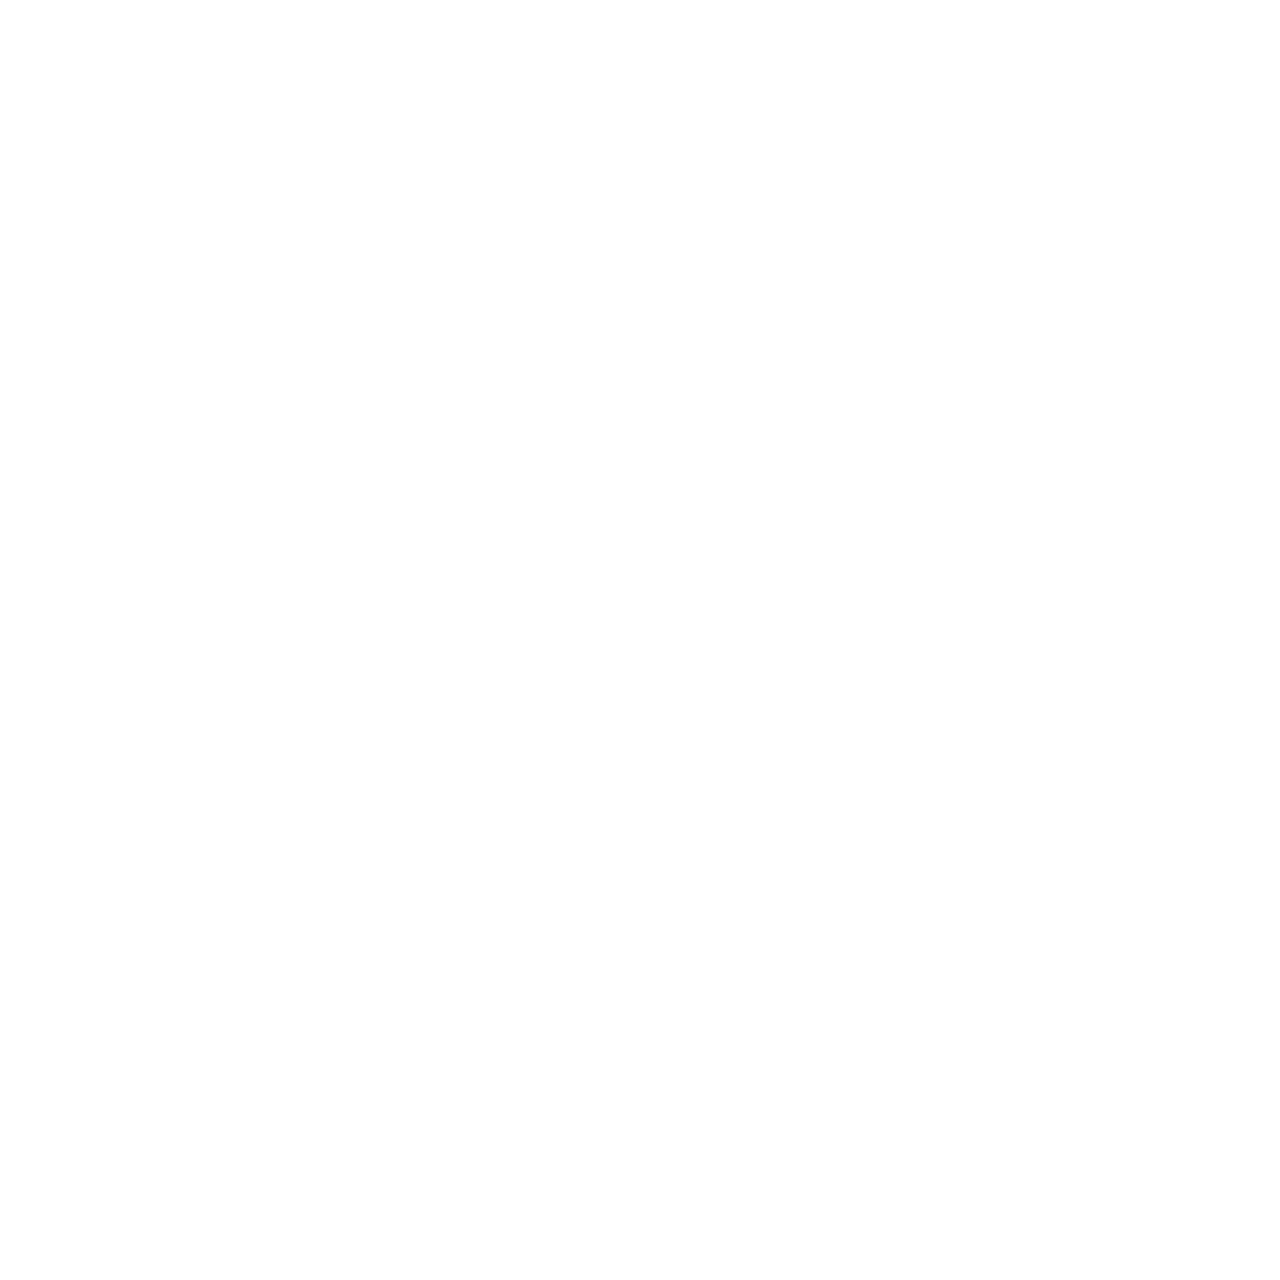 Christopher C. Taverna - Discover Harmony In Simplicity